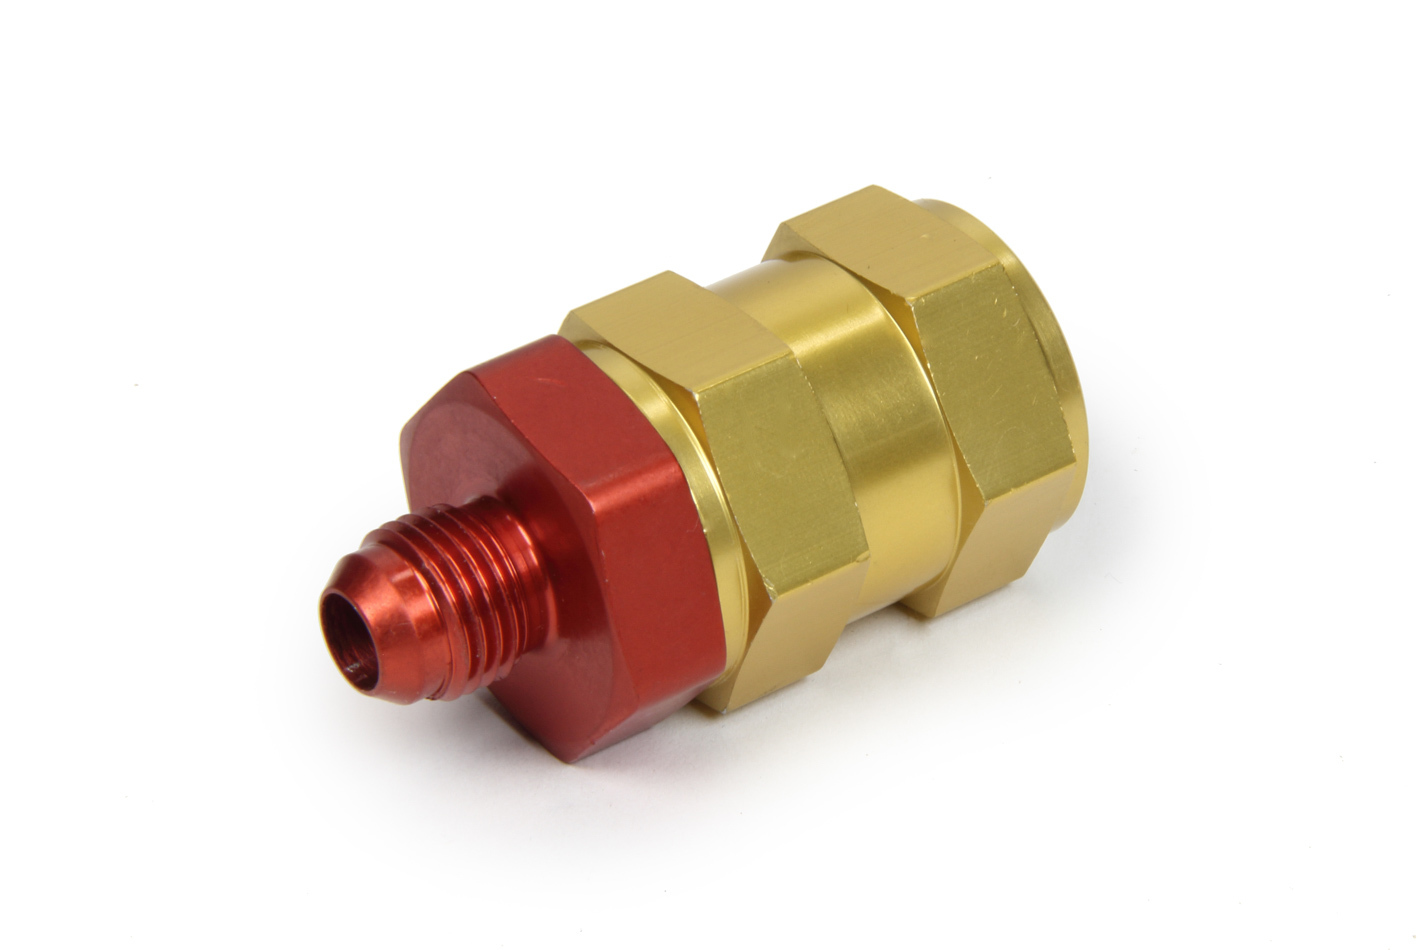 Jaz Products 834-206-06 Roll Over Valve, Vent, External, Check Valve, 6 AN Male Inlet, Brass / Aluminum, Red Anodized, Each